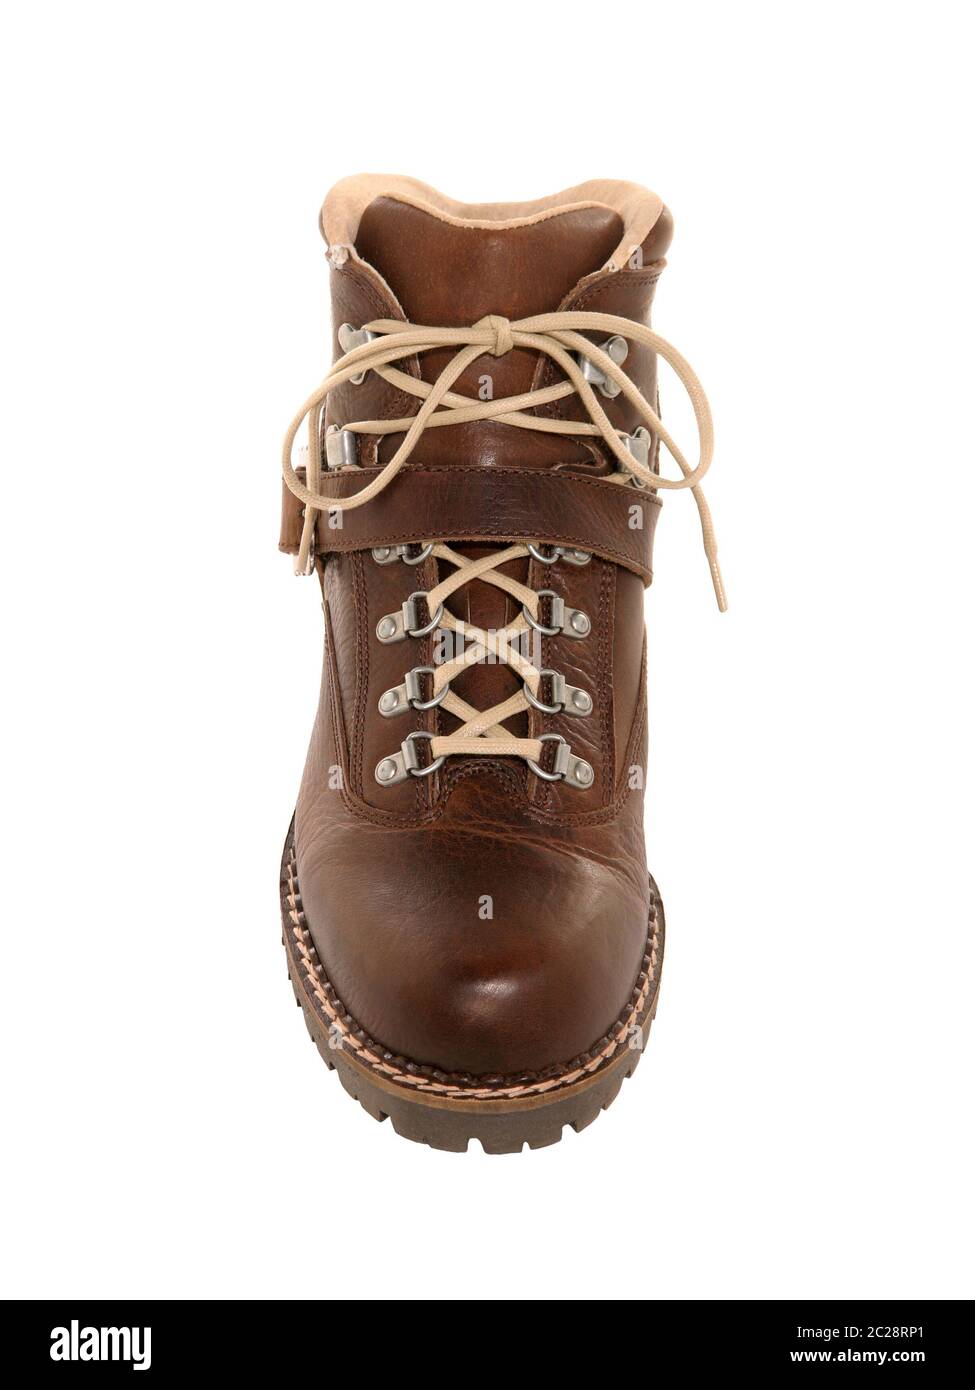 hiking boot brown leather traditional style isolated on white Stock Photo